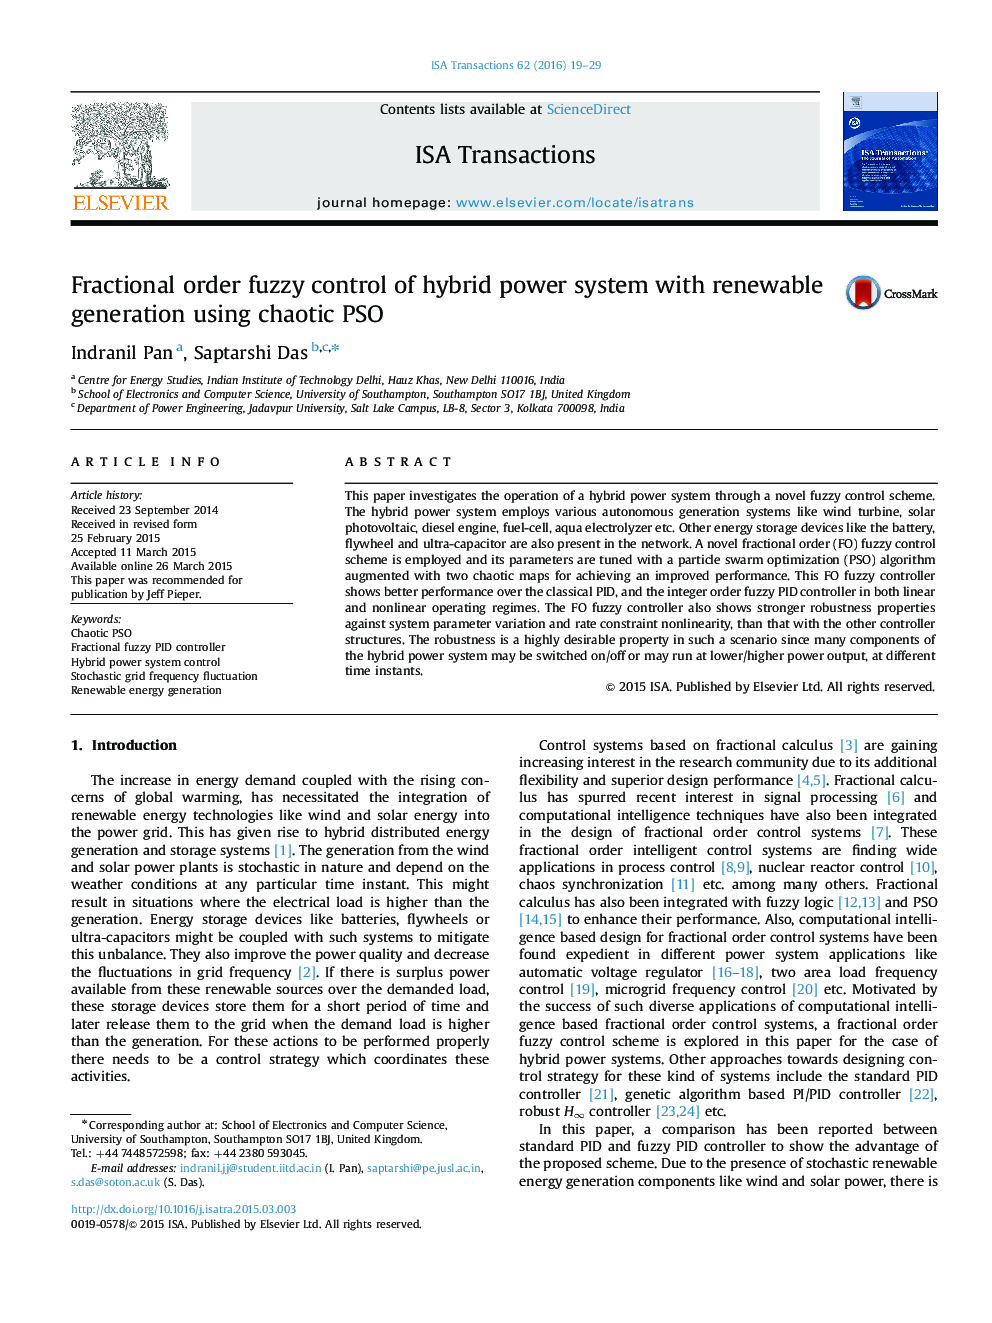 Fractional order fuzzy control of hybrid power system with renewable generation using chaotic PSO